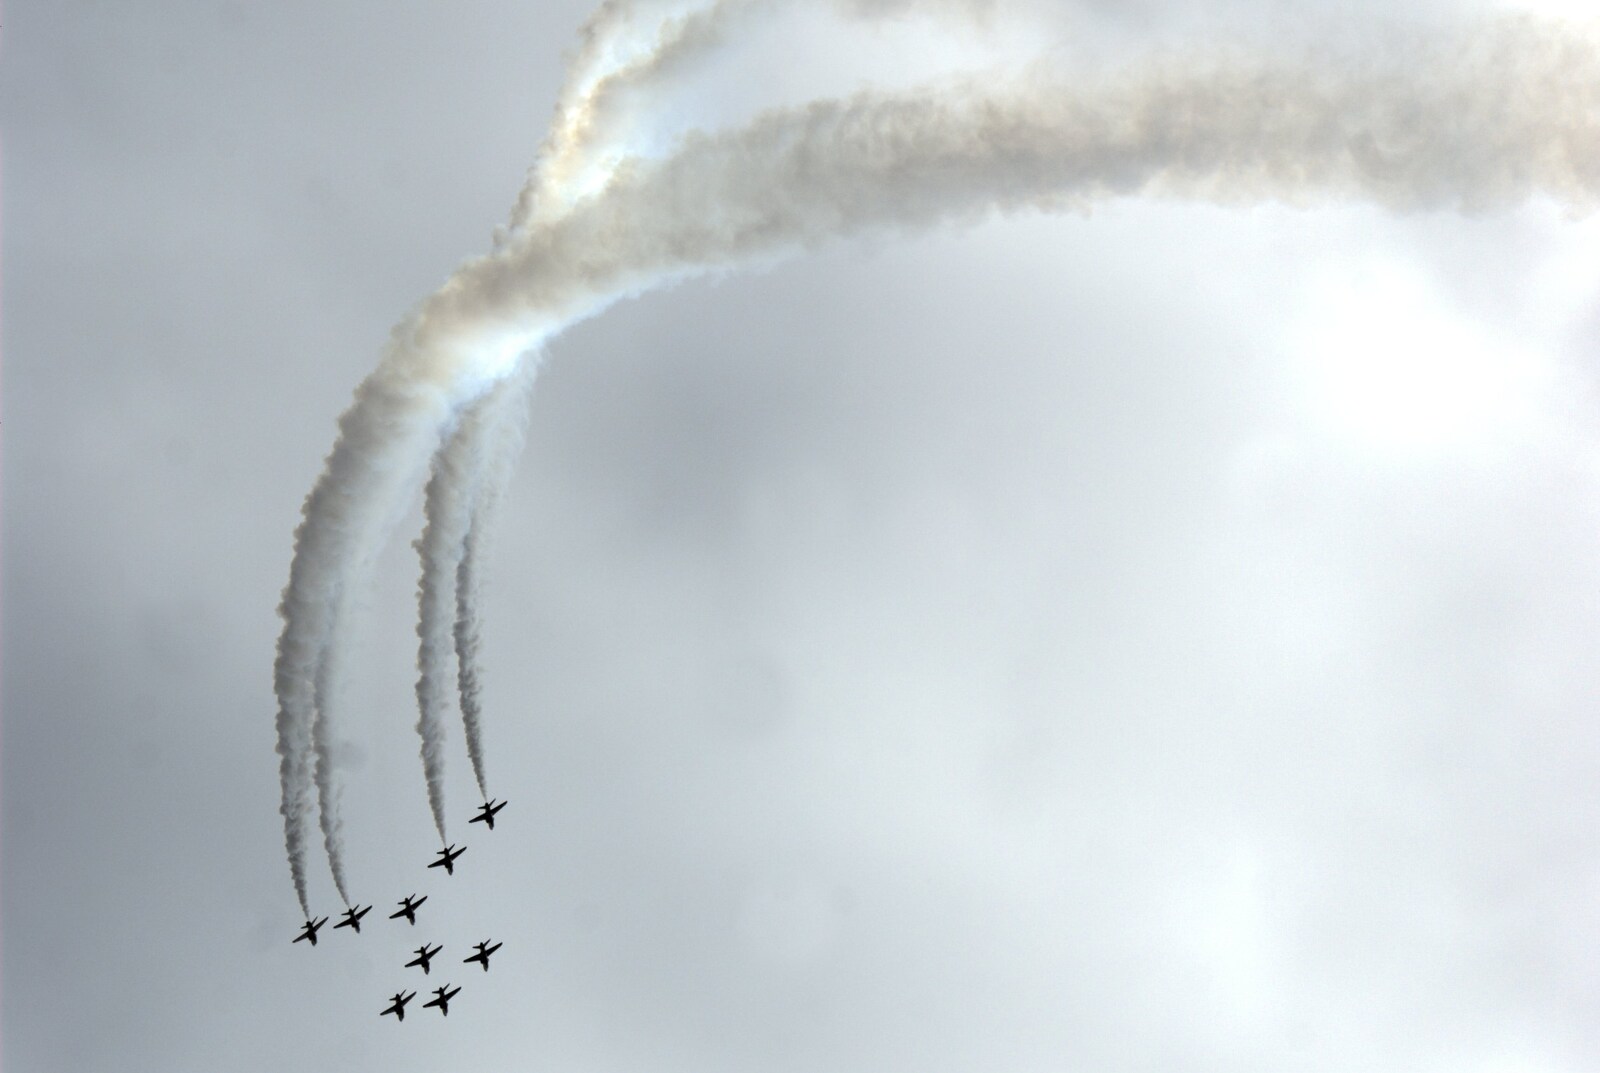 The Reds roll over in Apollo formation from The Eye Show and the Red Arrows, Palgrave, Suffolk - 31st August 2009